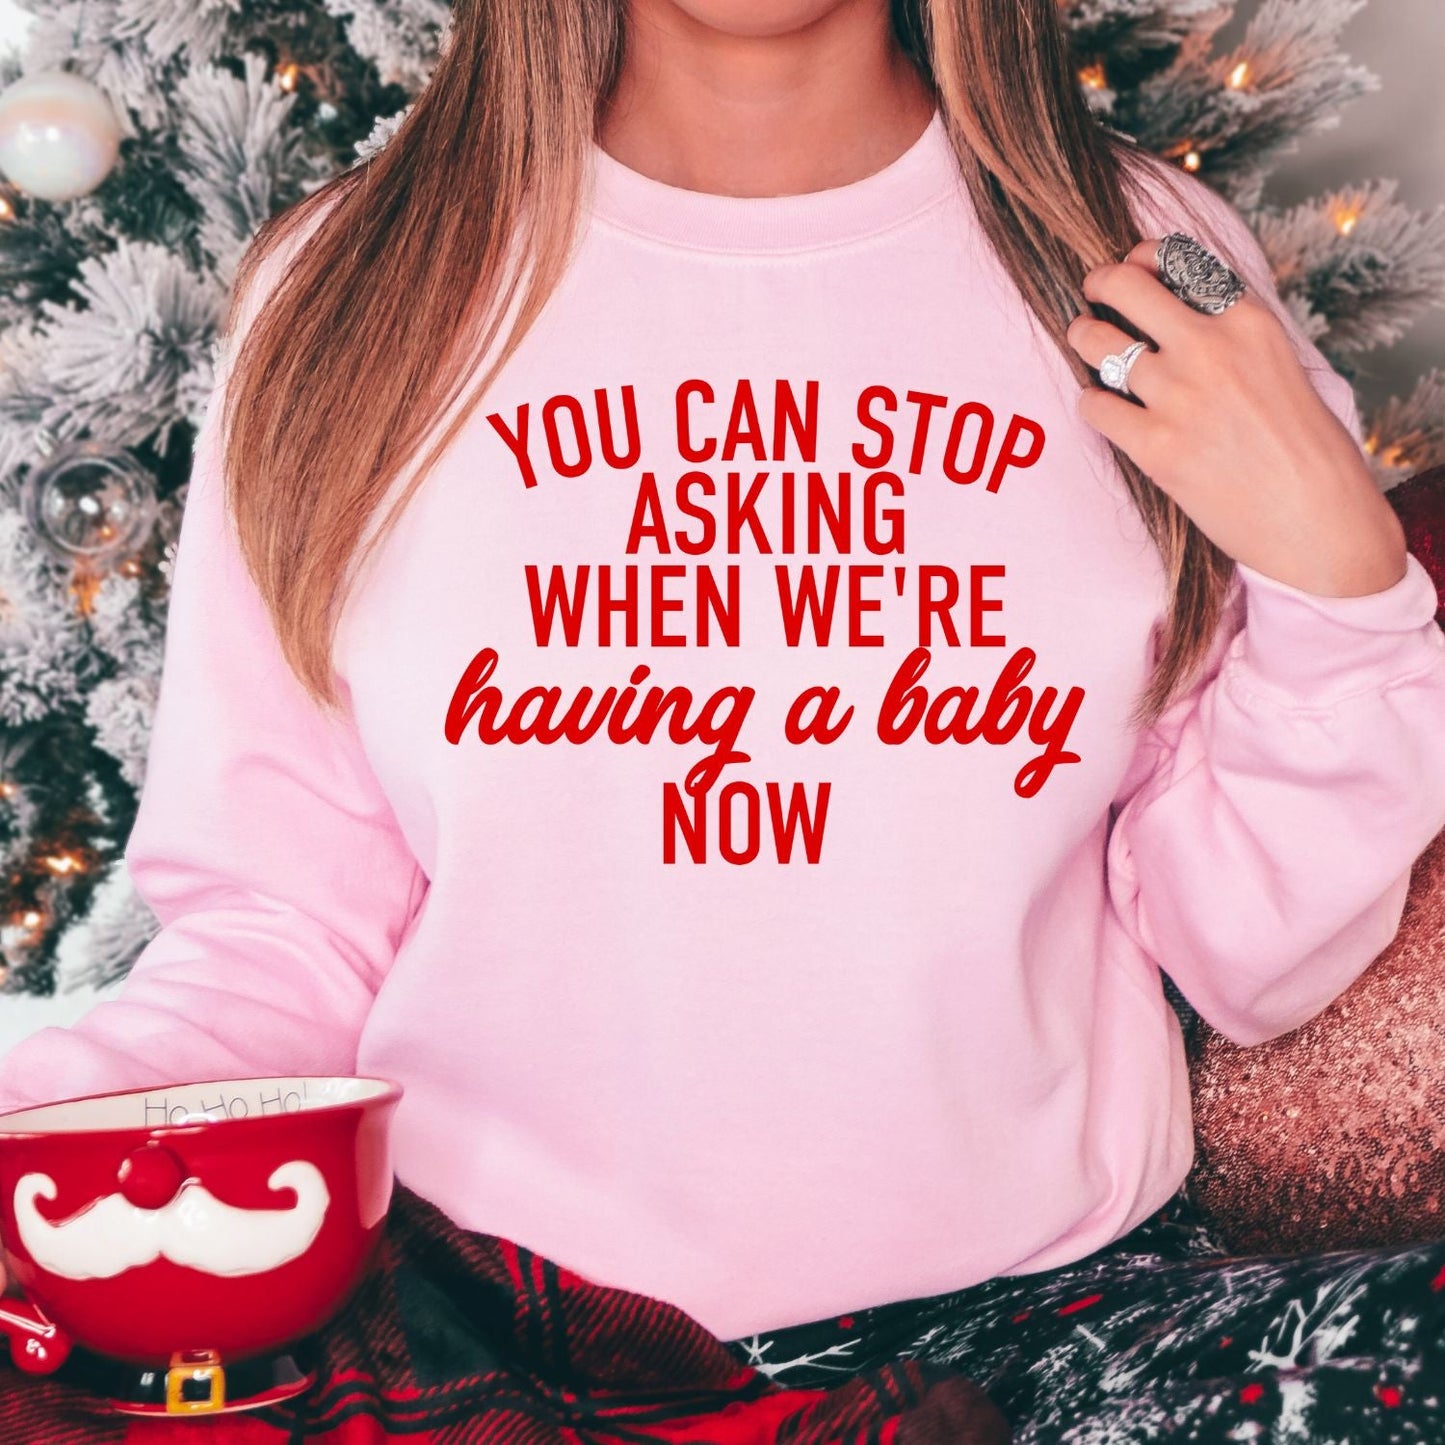 You Can Stop Asking When We're Having a Baby Now Sweatshirt